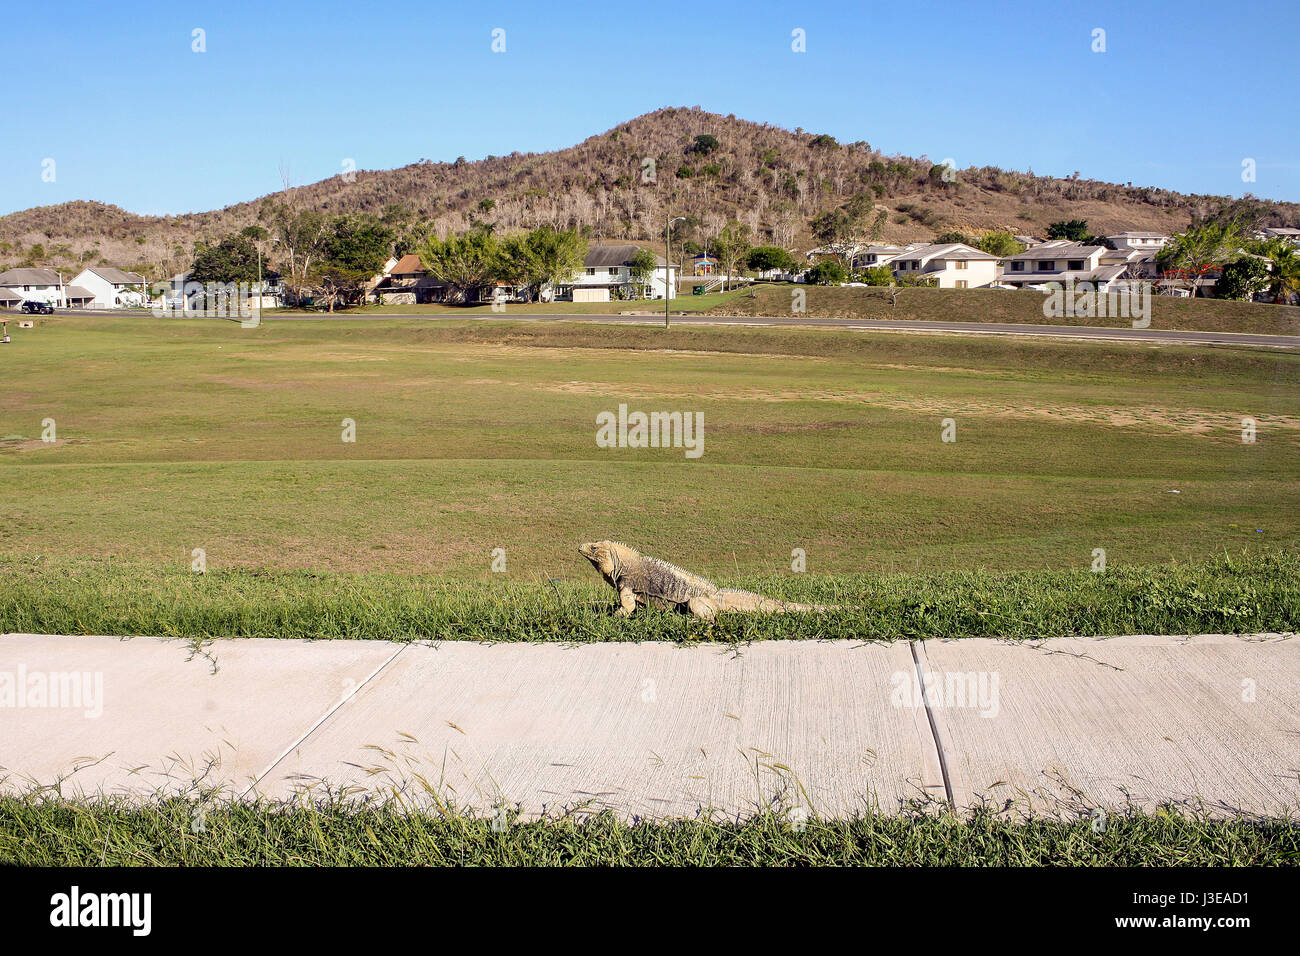 An iguana relaxes in the grass in front of homes in Guantanamo Bay, Cuba Stock Photo